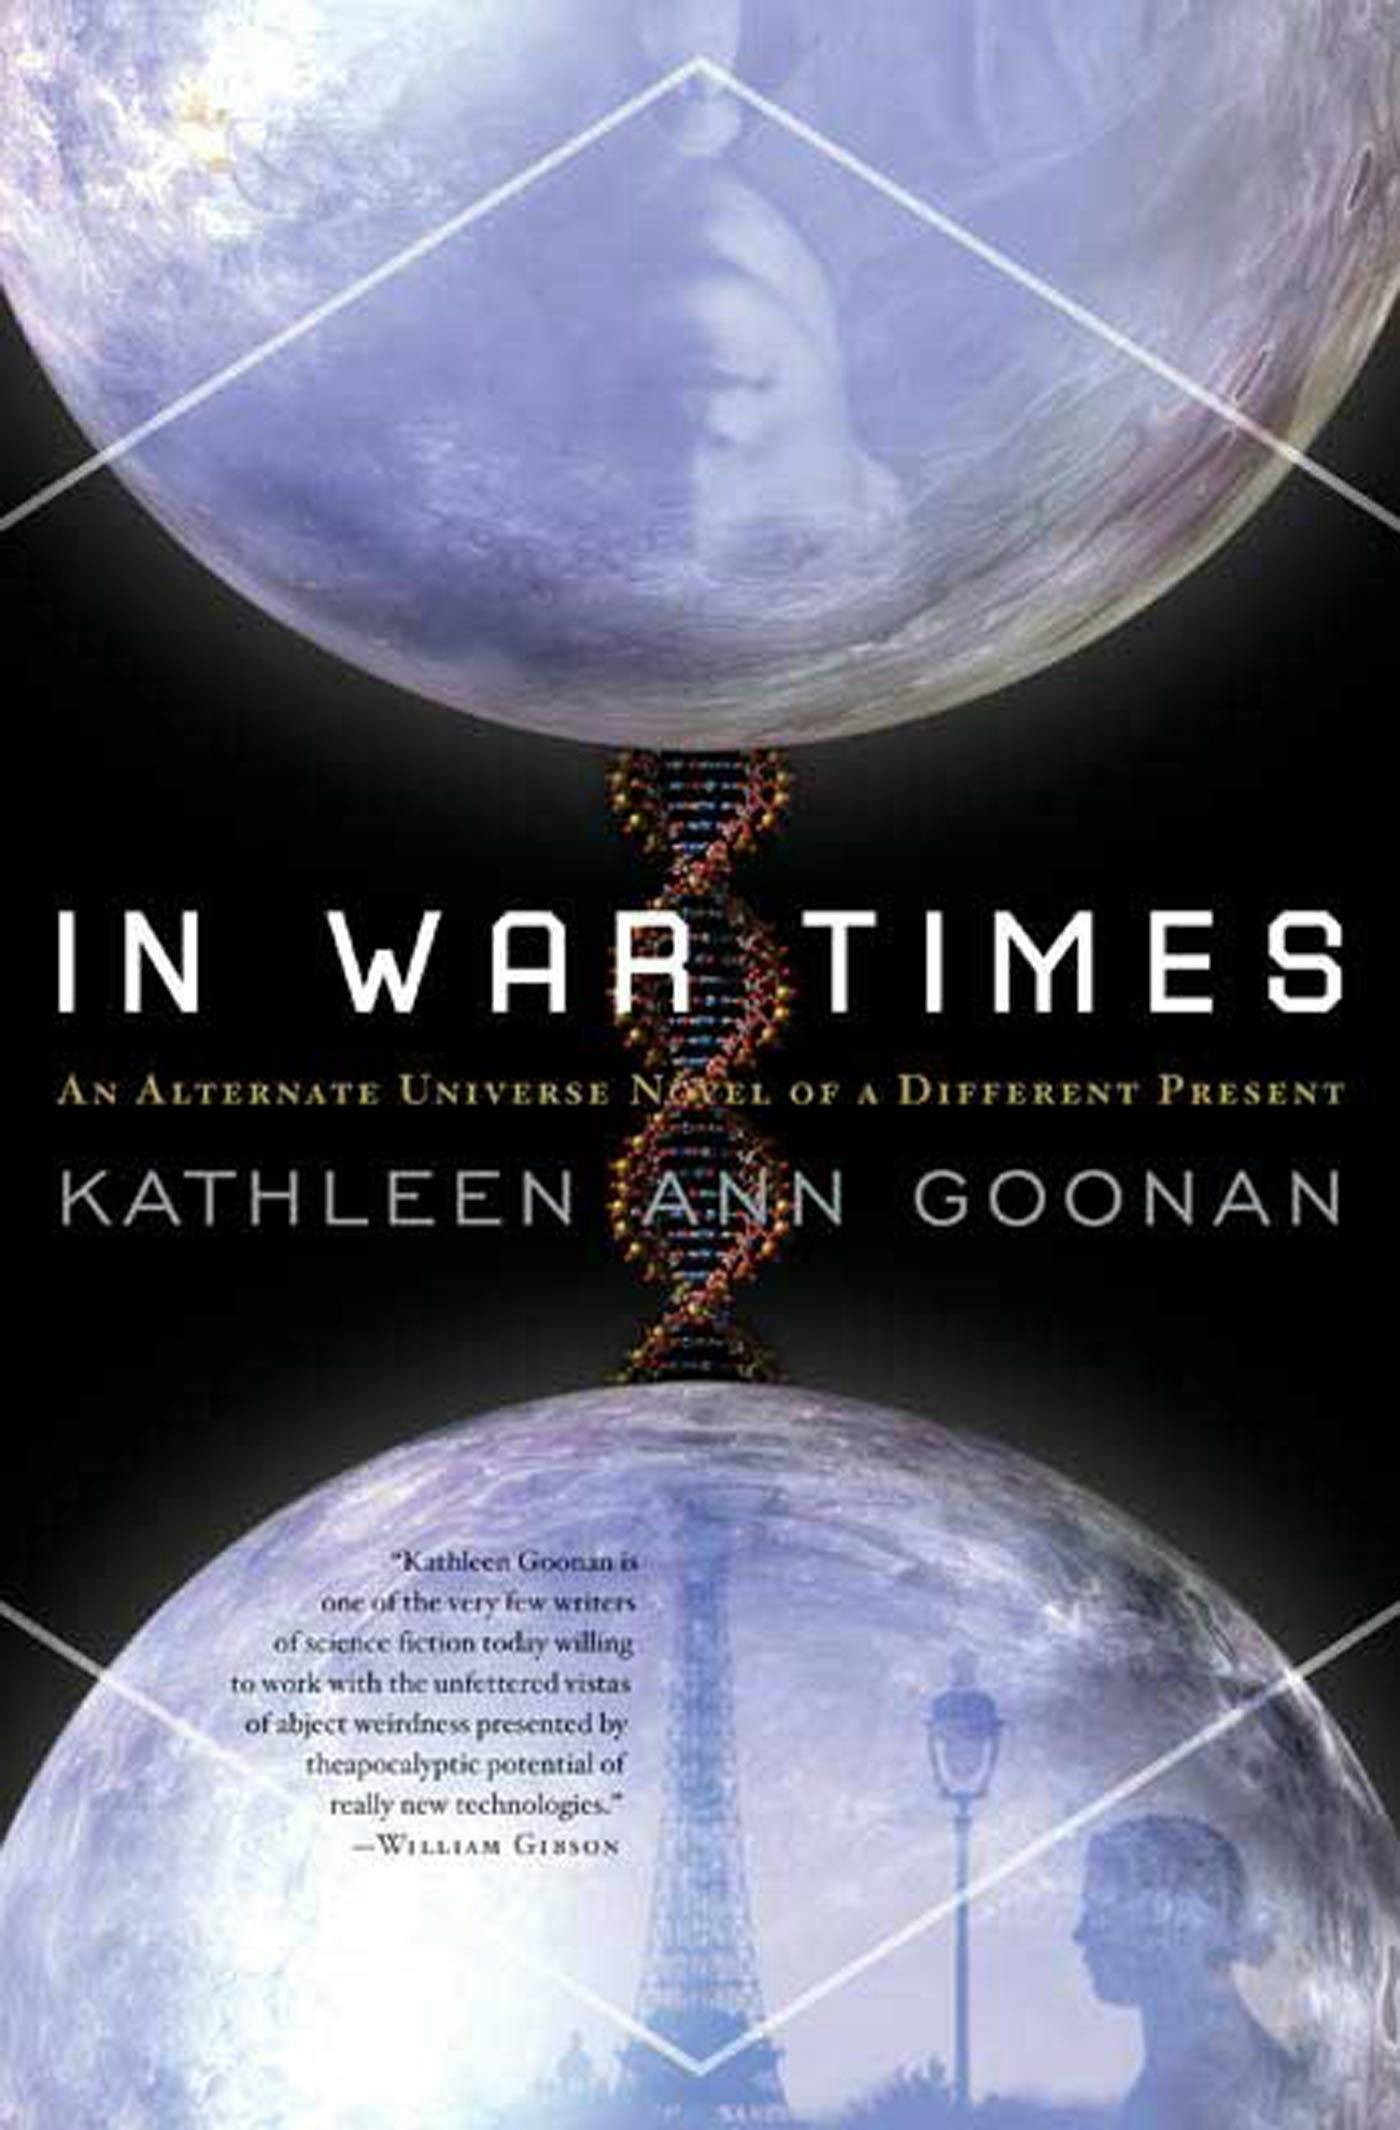 Cover for the book titled as: In War Times